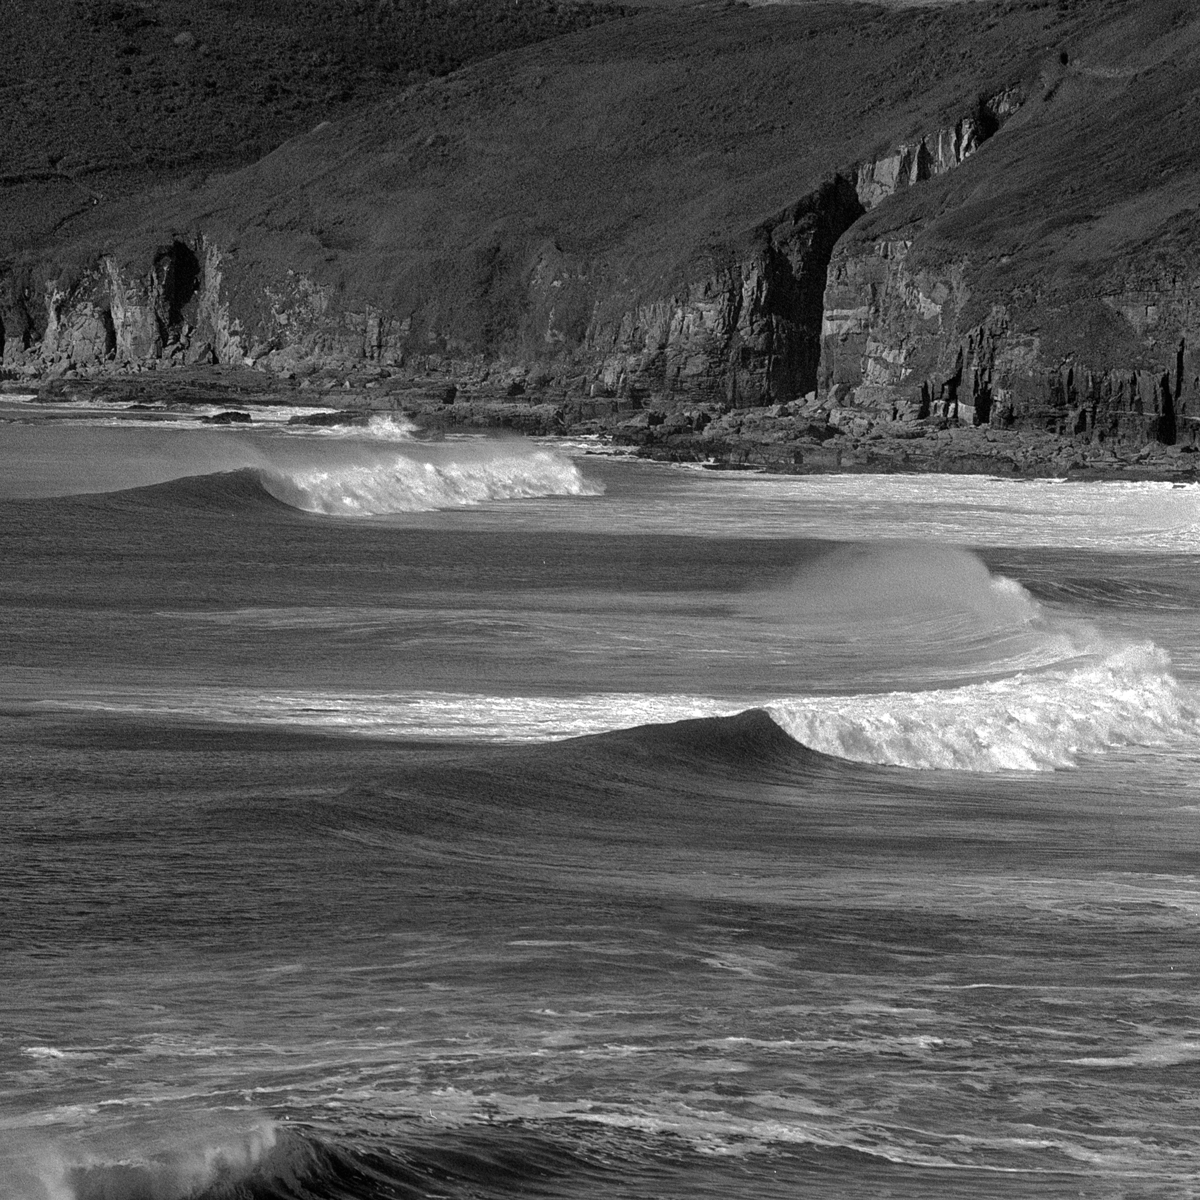 Black and white landscape photograph of the sea and ocean